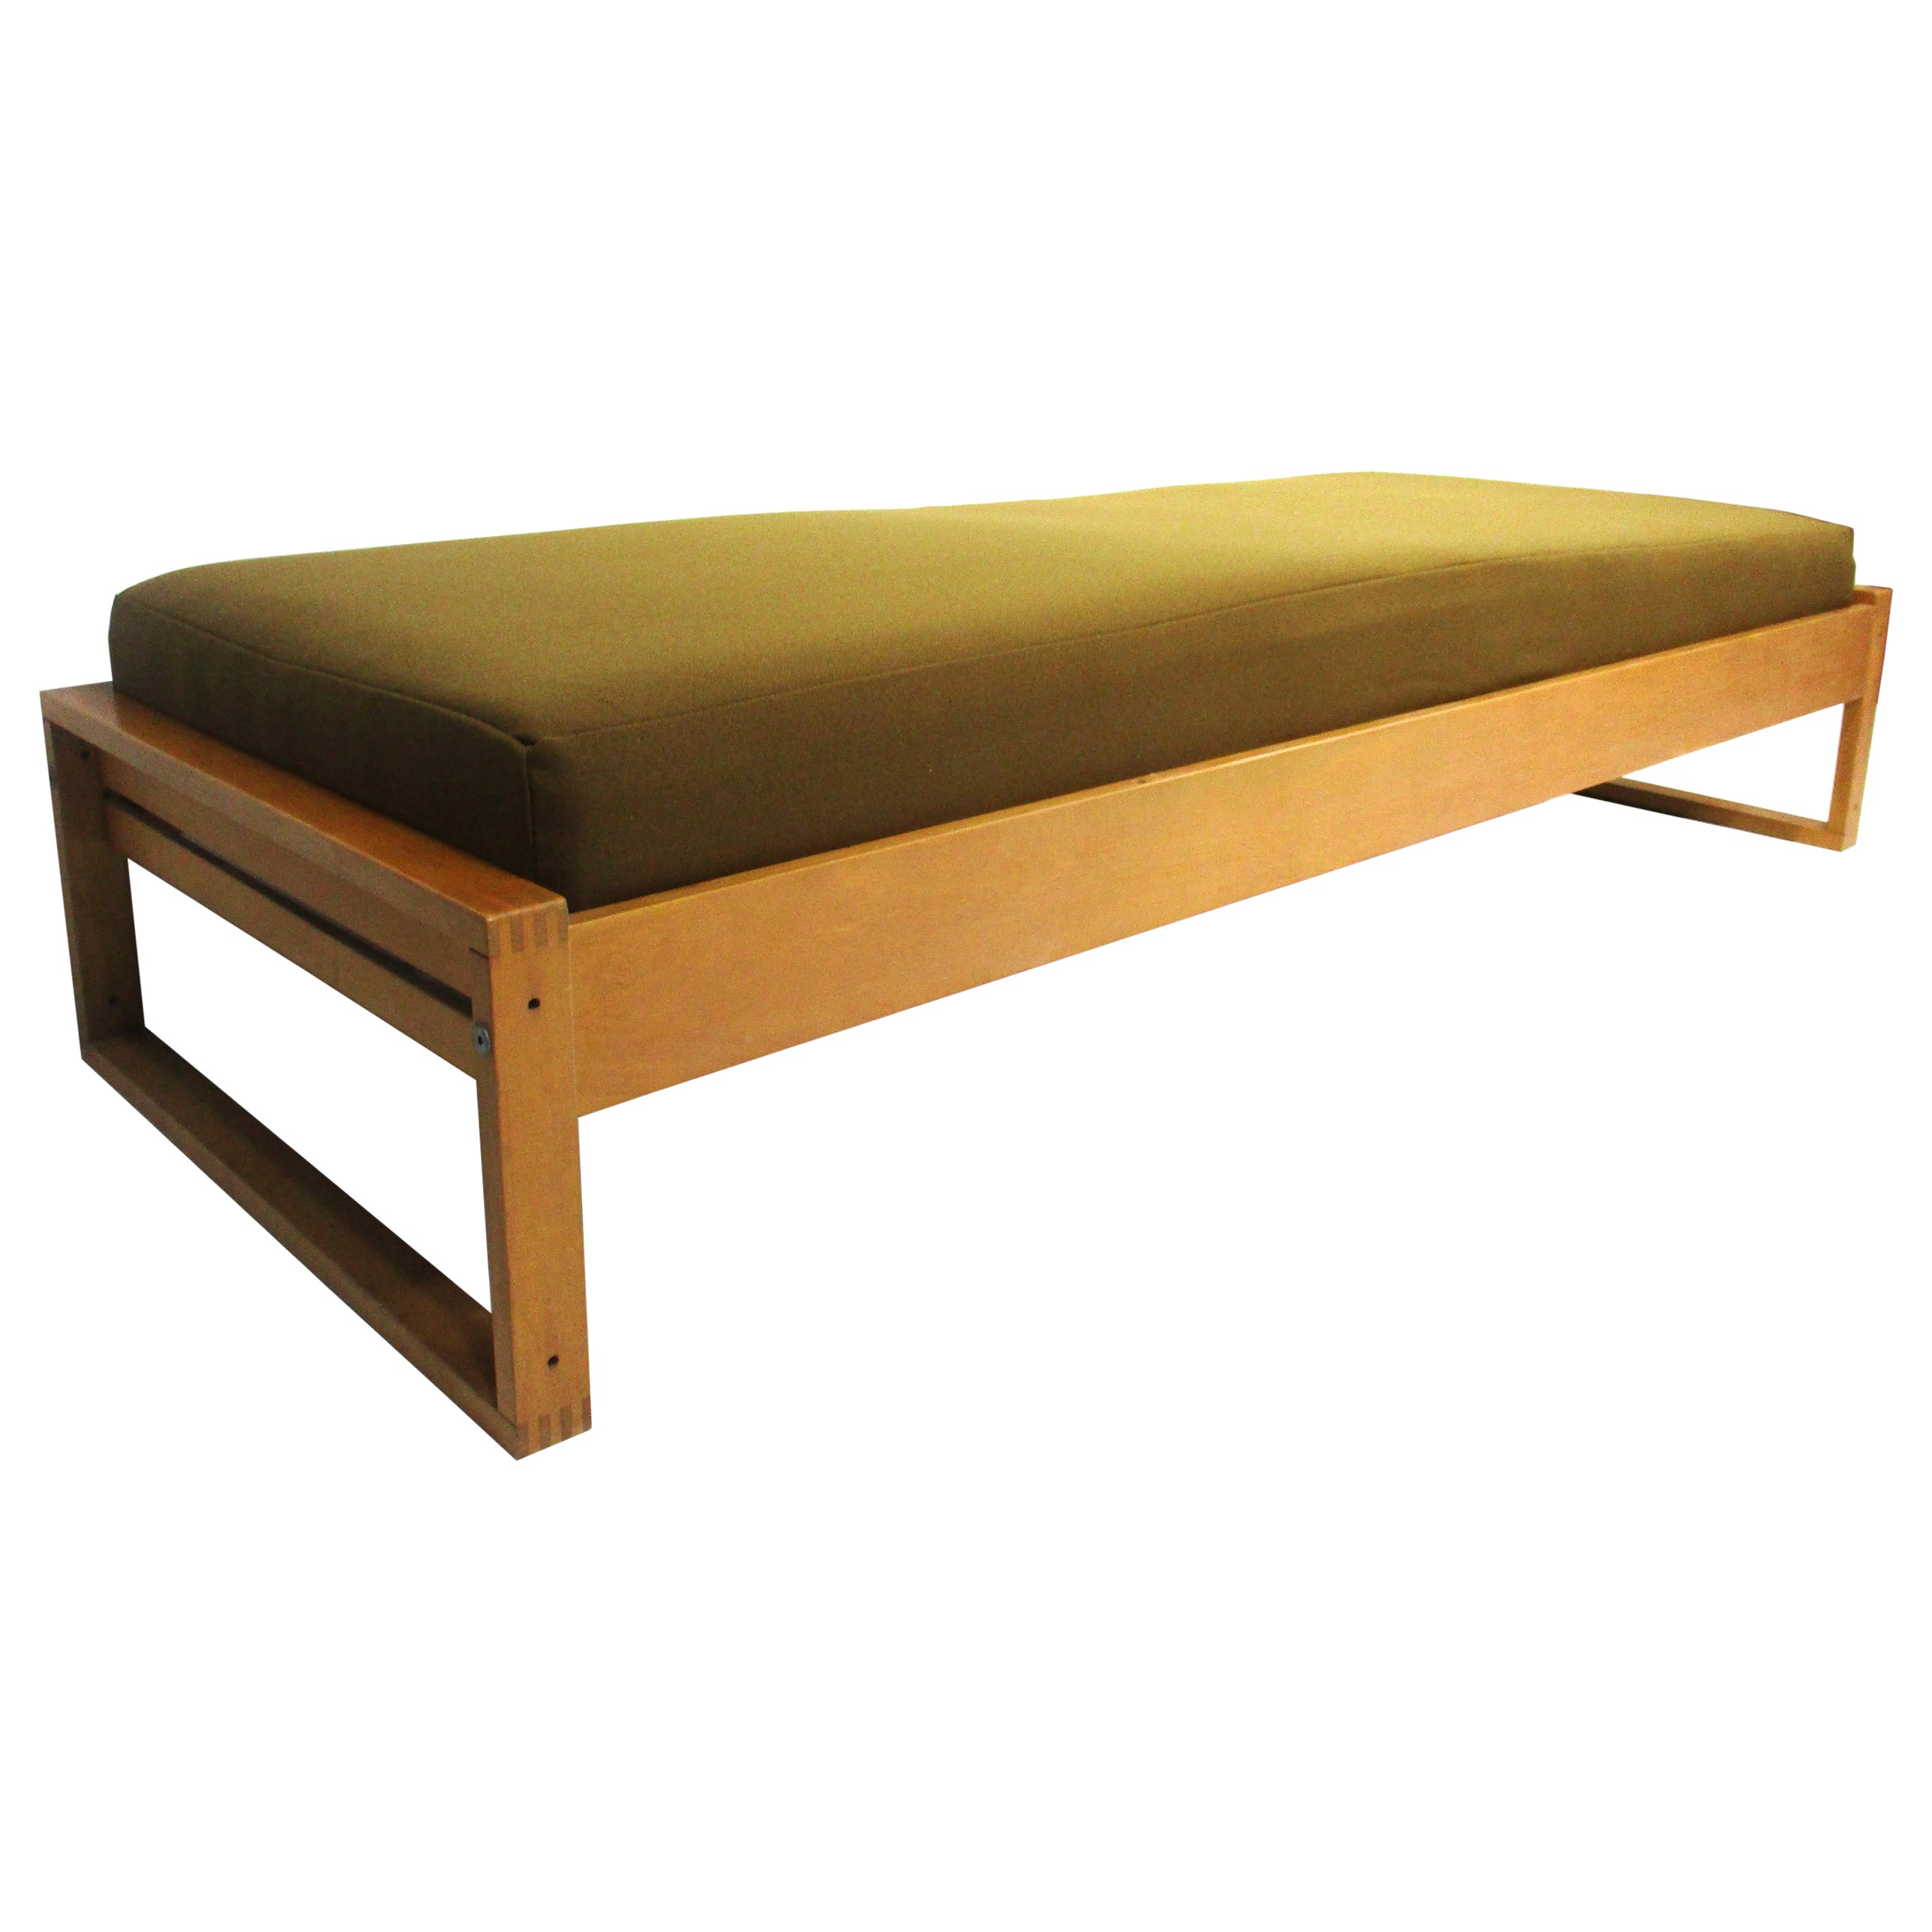 Daybed by Ingvar Anderssen for Averskogs Sweden in the style of Alvar Aalto